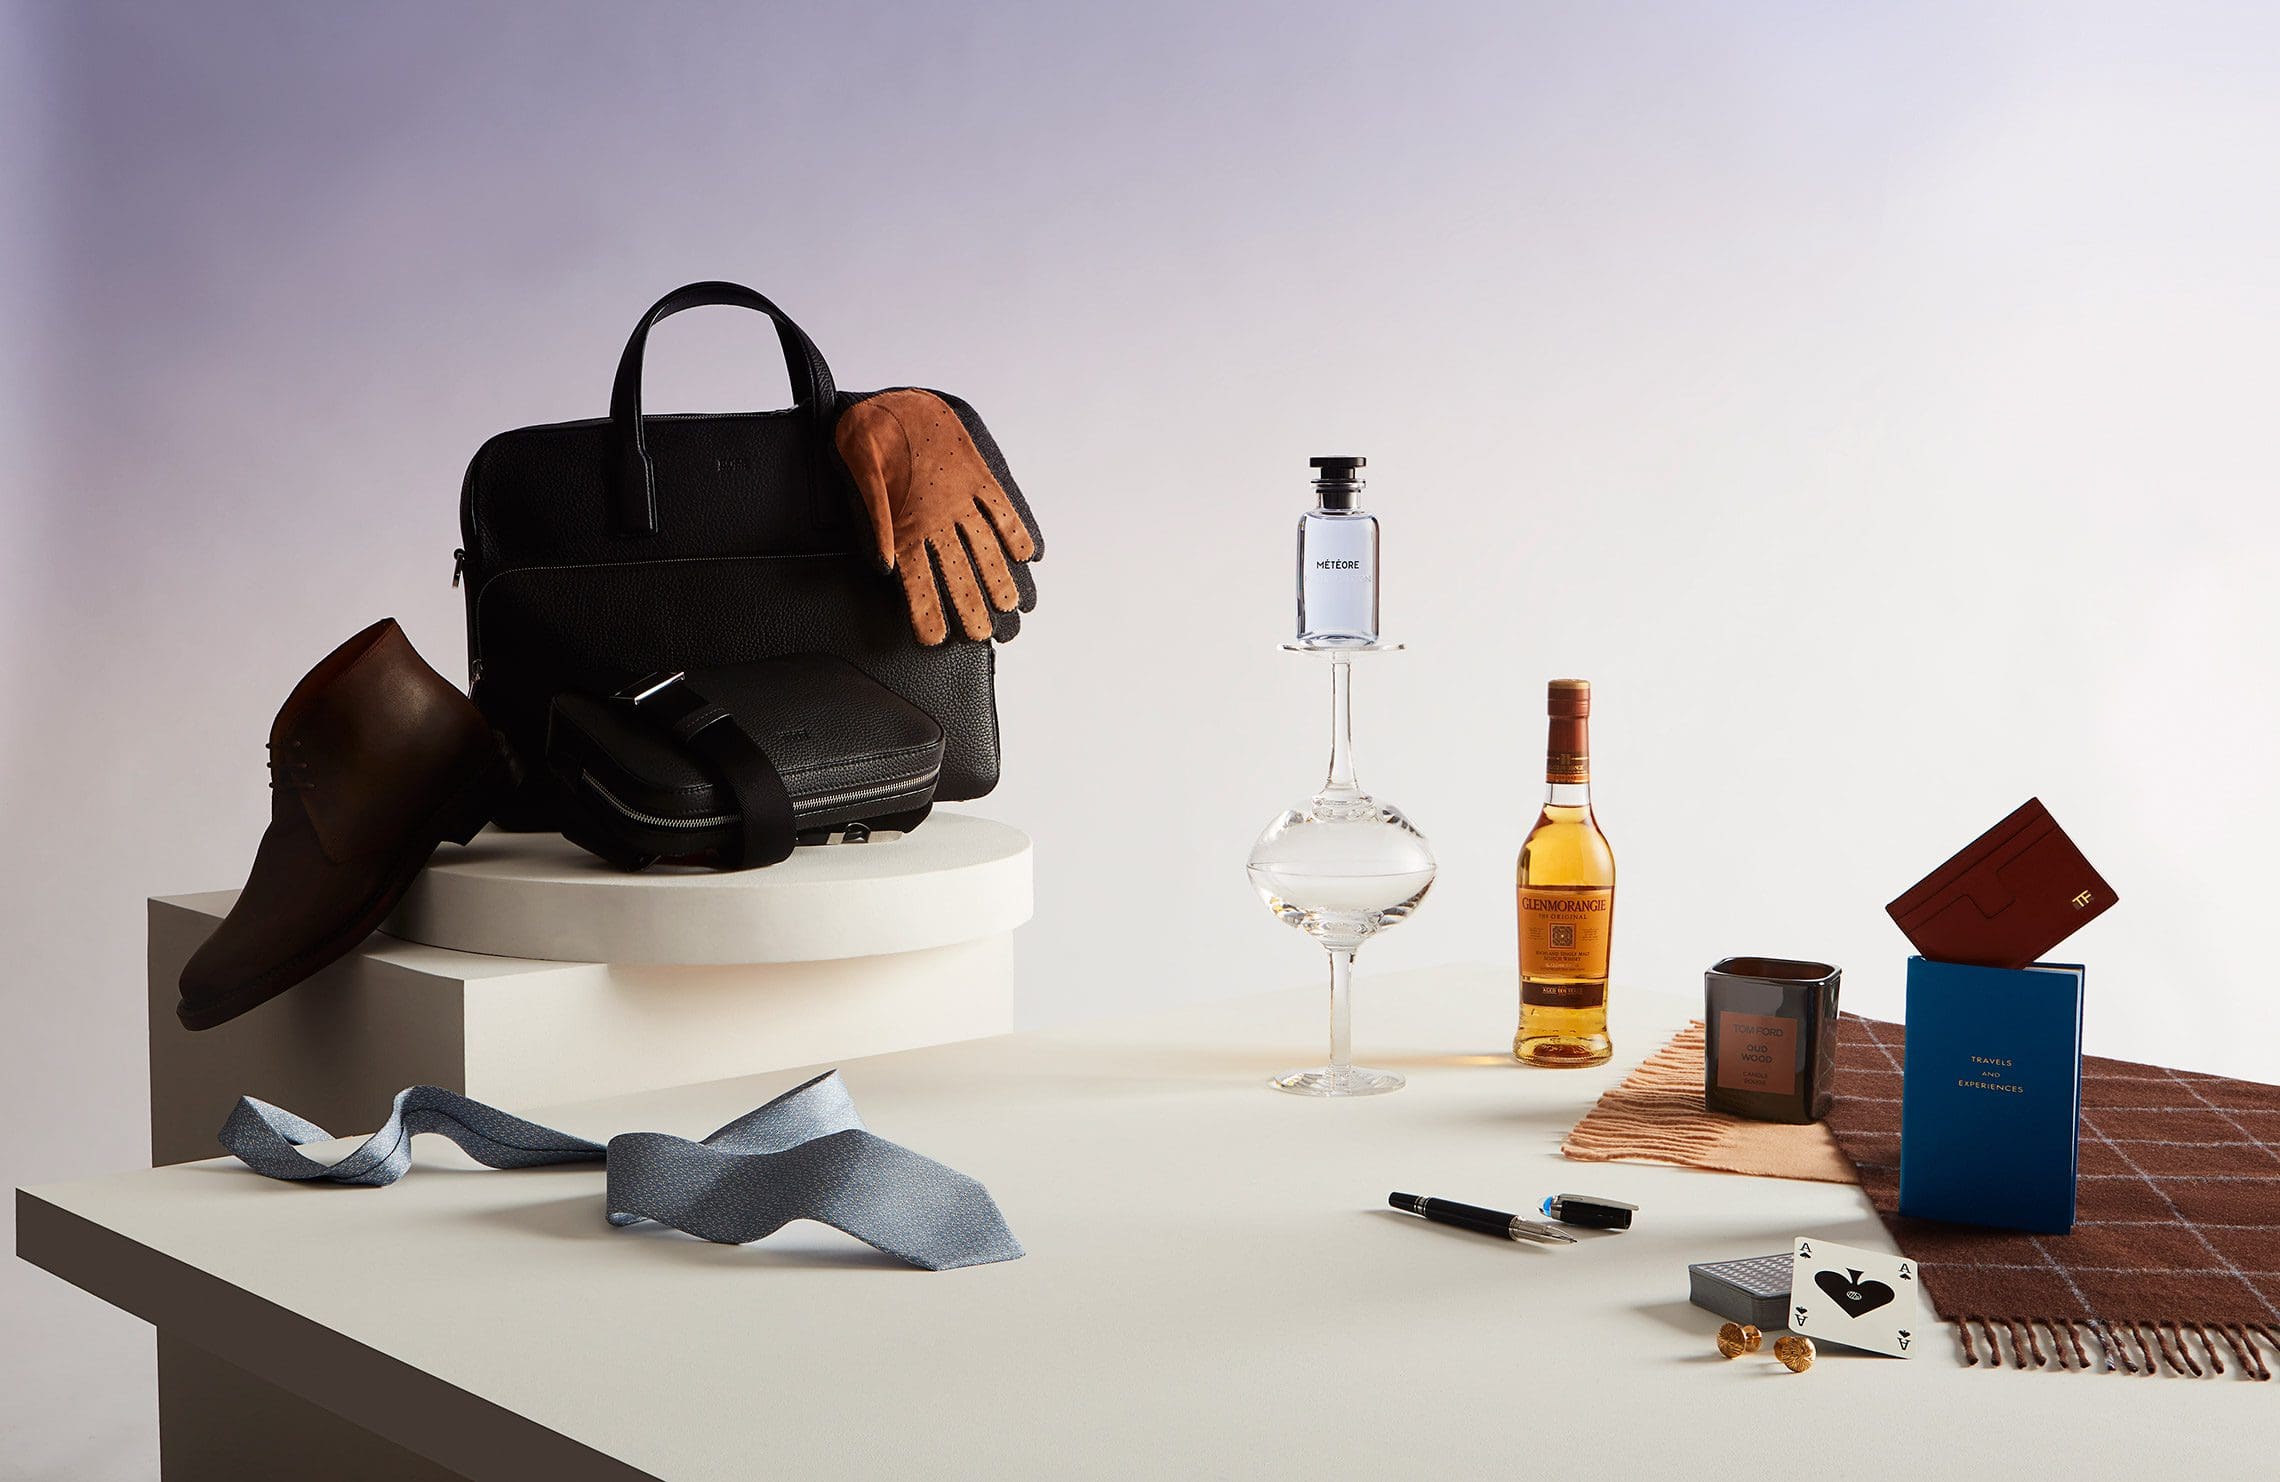 Handsome gifts for him: grooming, gadgets and timeless accessories